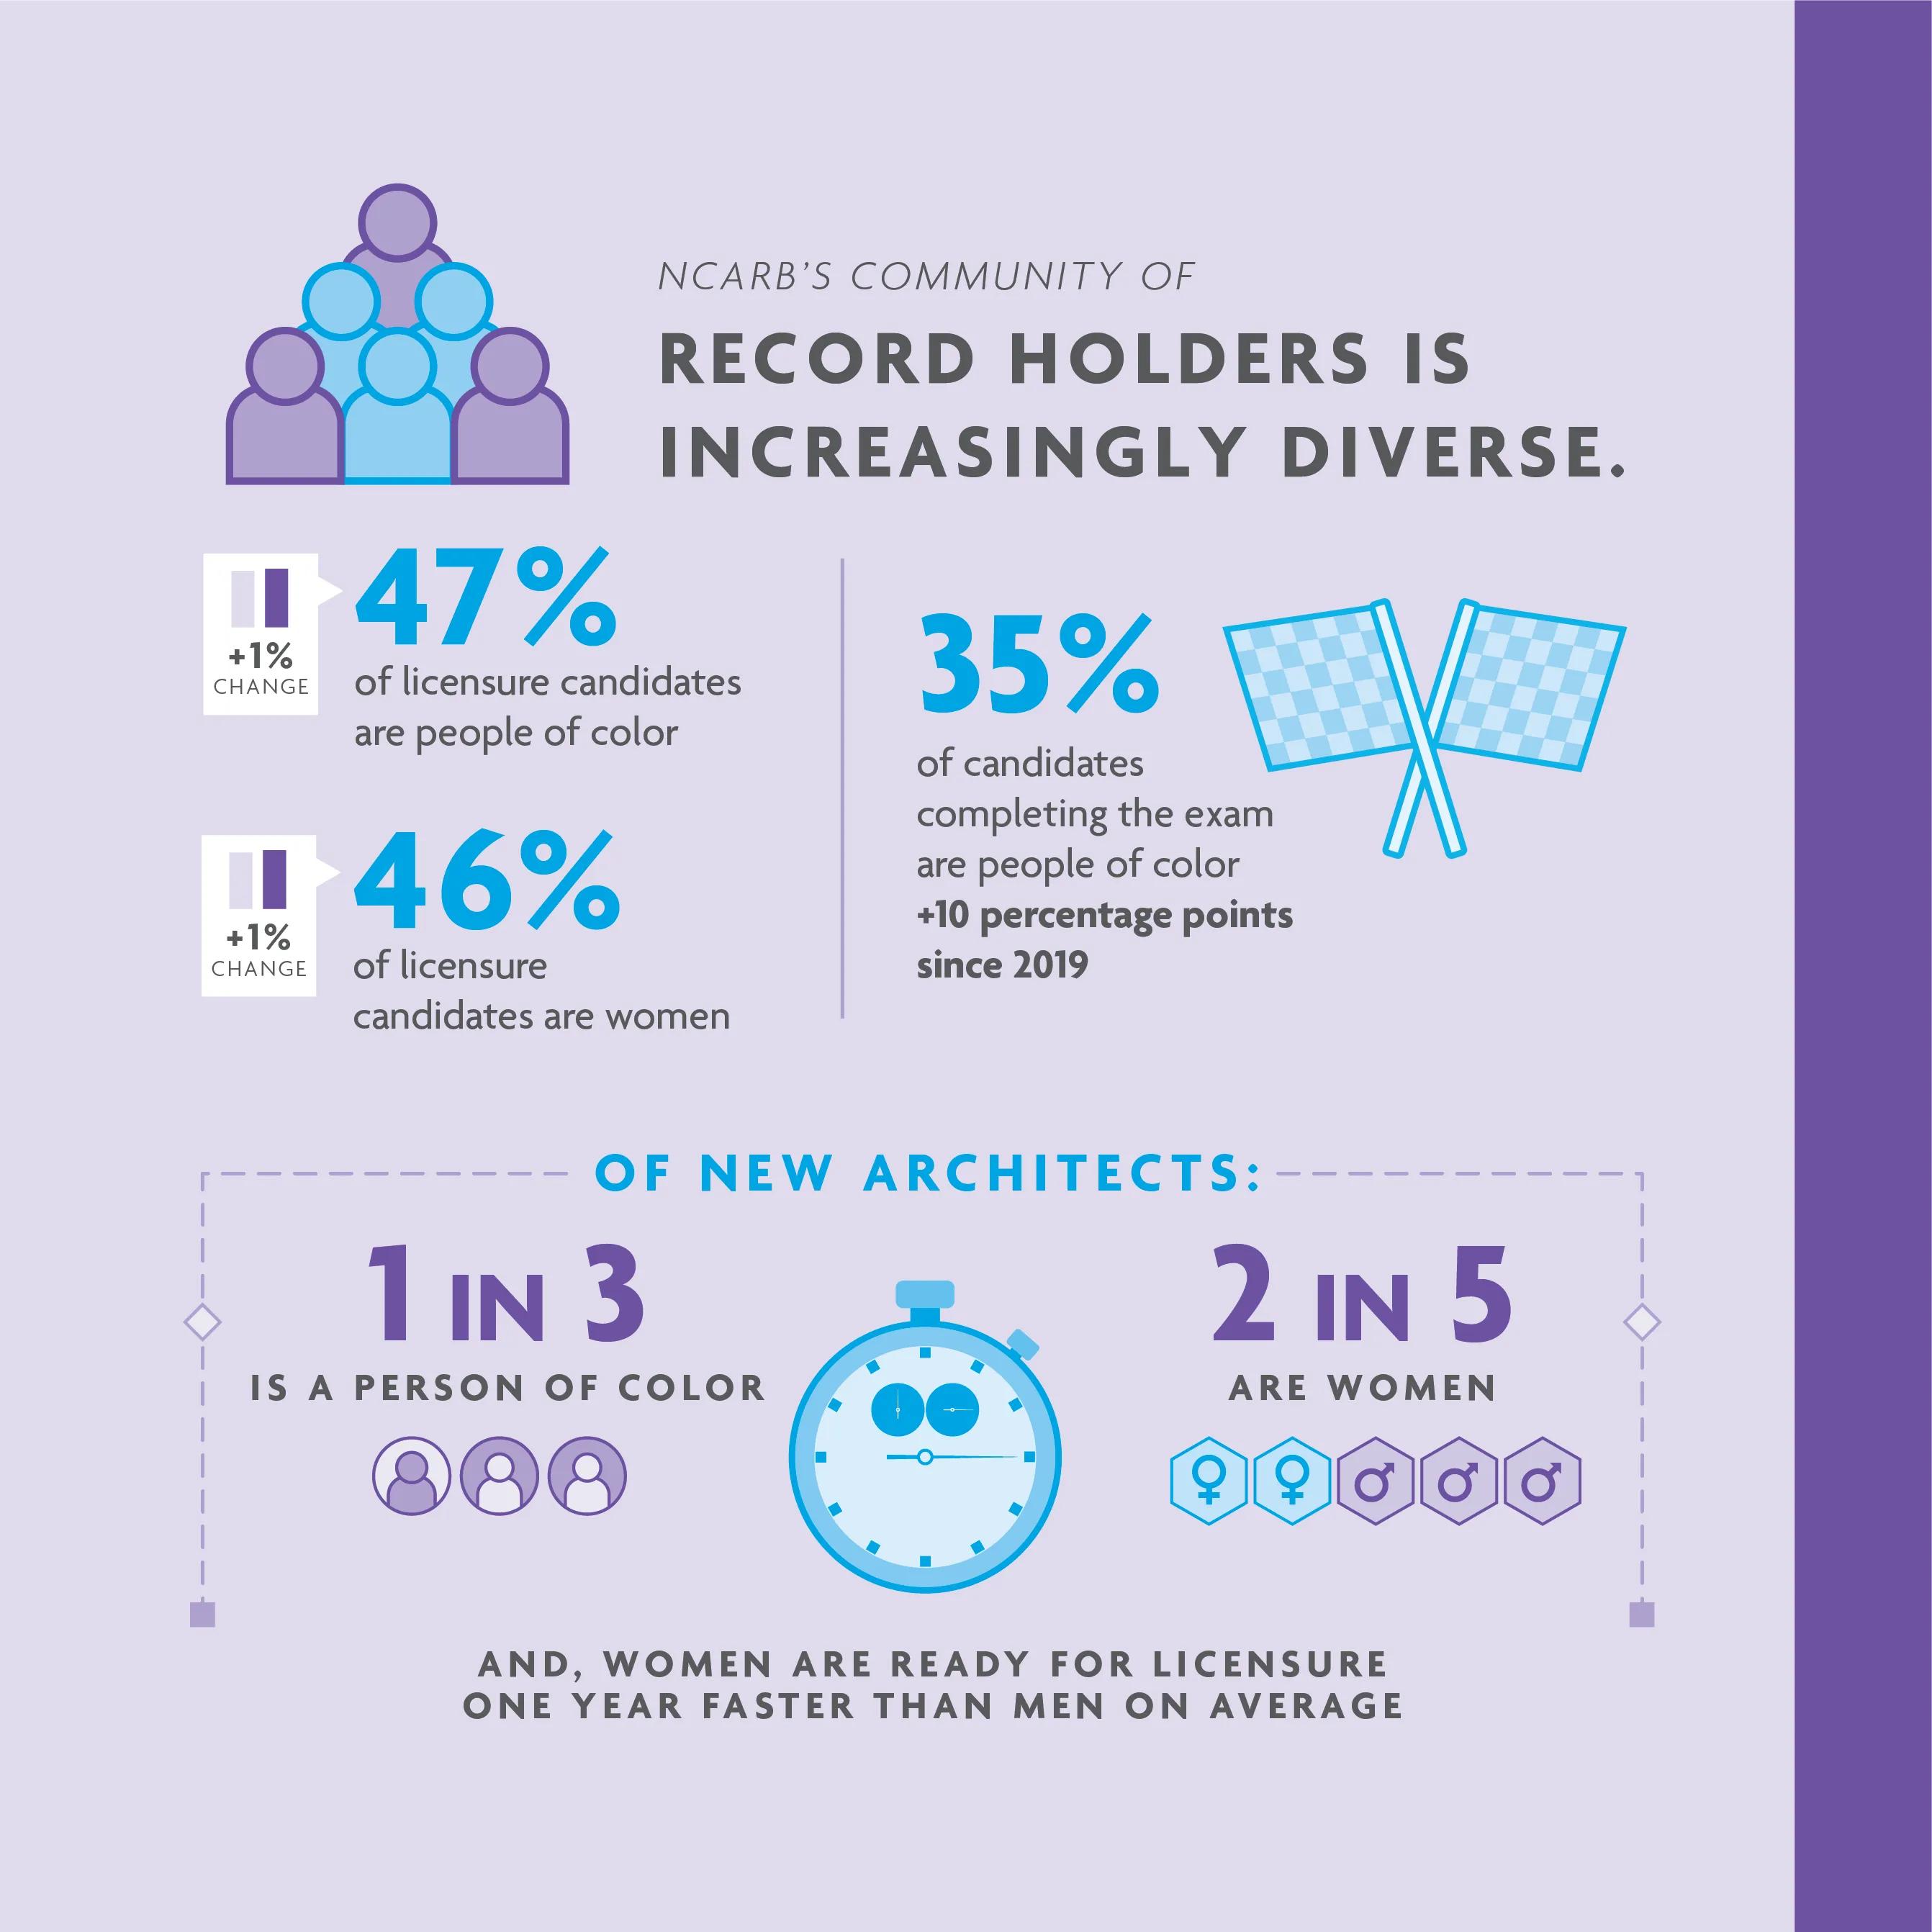 : Racial and gender equity improved at all early career stages over the past five years. For help with data accessibility, contact communications@ncarb.org.